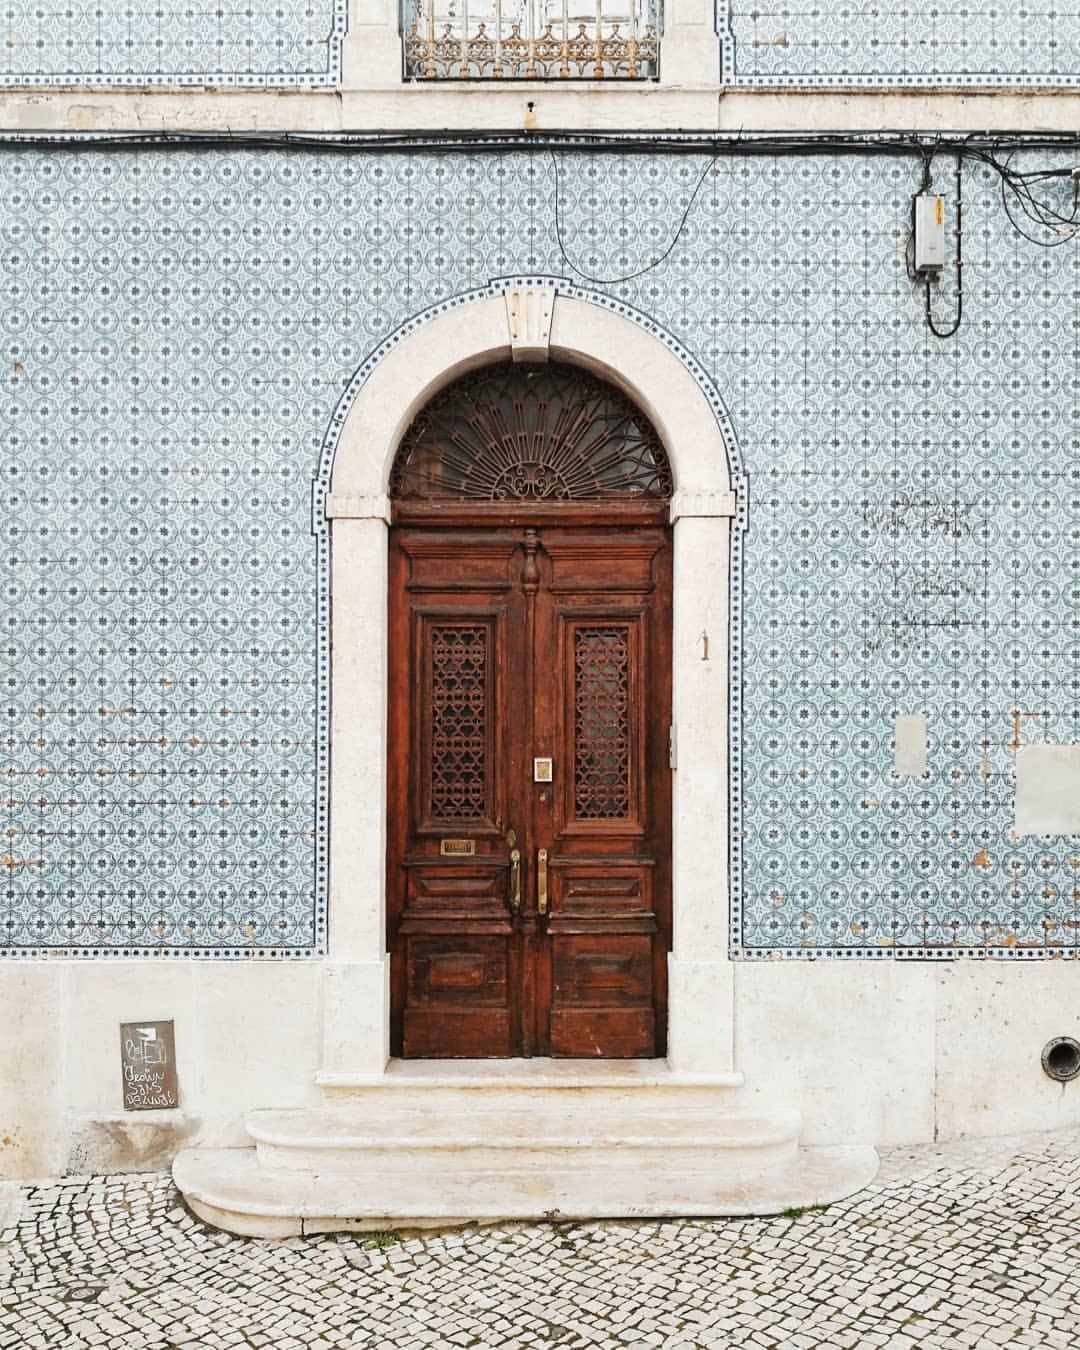 Brico Depot Portugal Unique A Gorgeous Tile Doorway with An Old Beautifully Made Wood